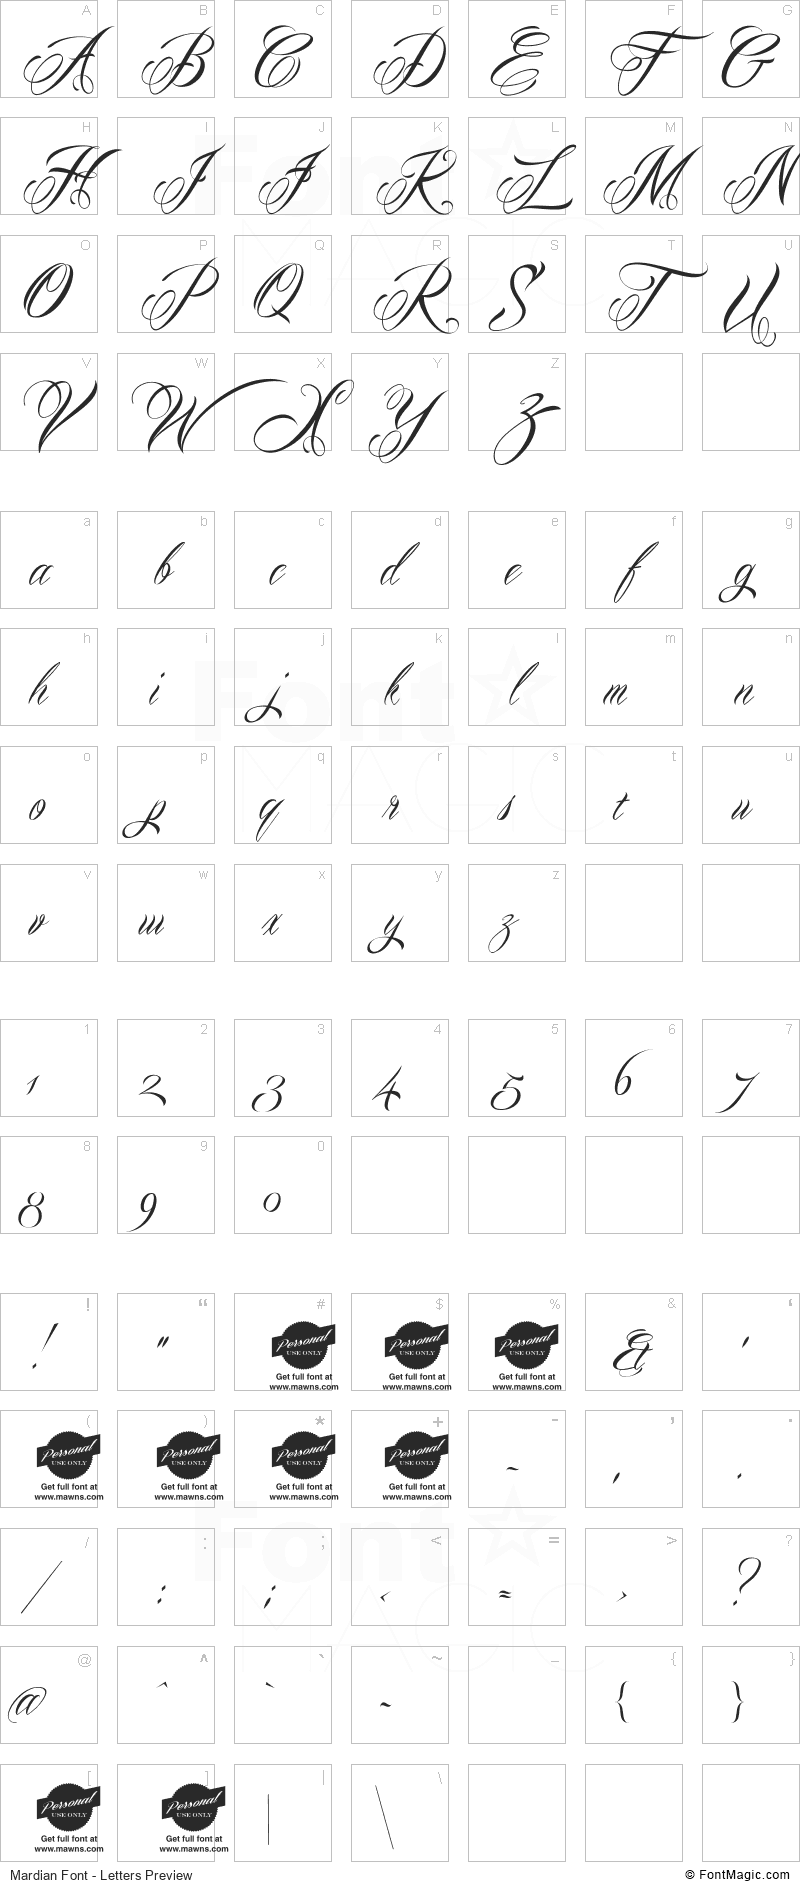 Mardian Font - All Latters Preview Chart